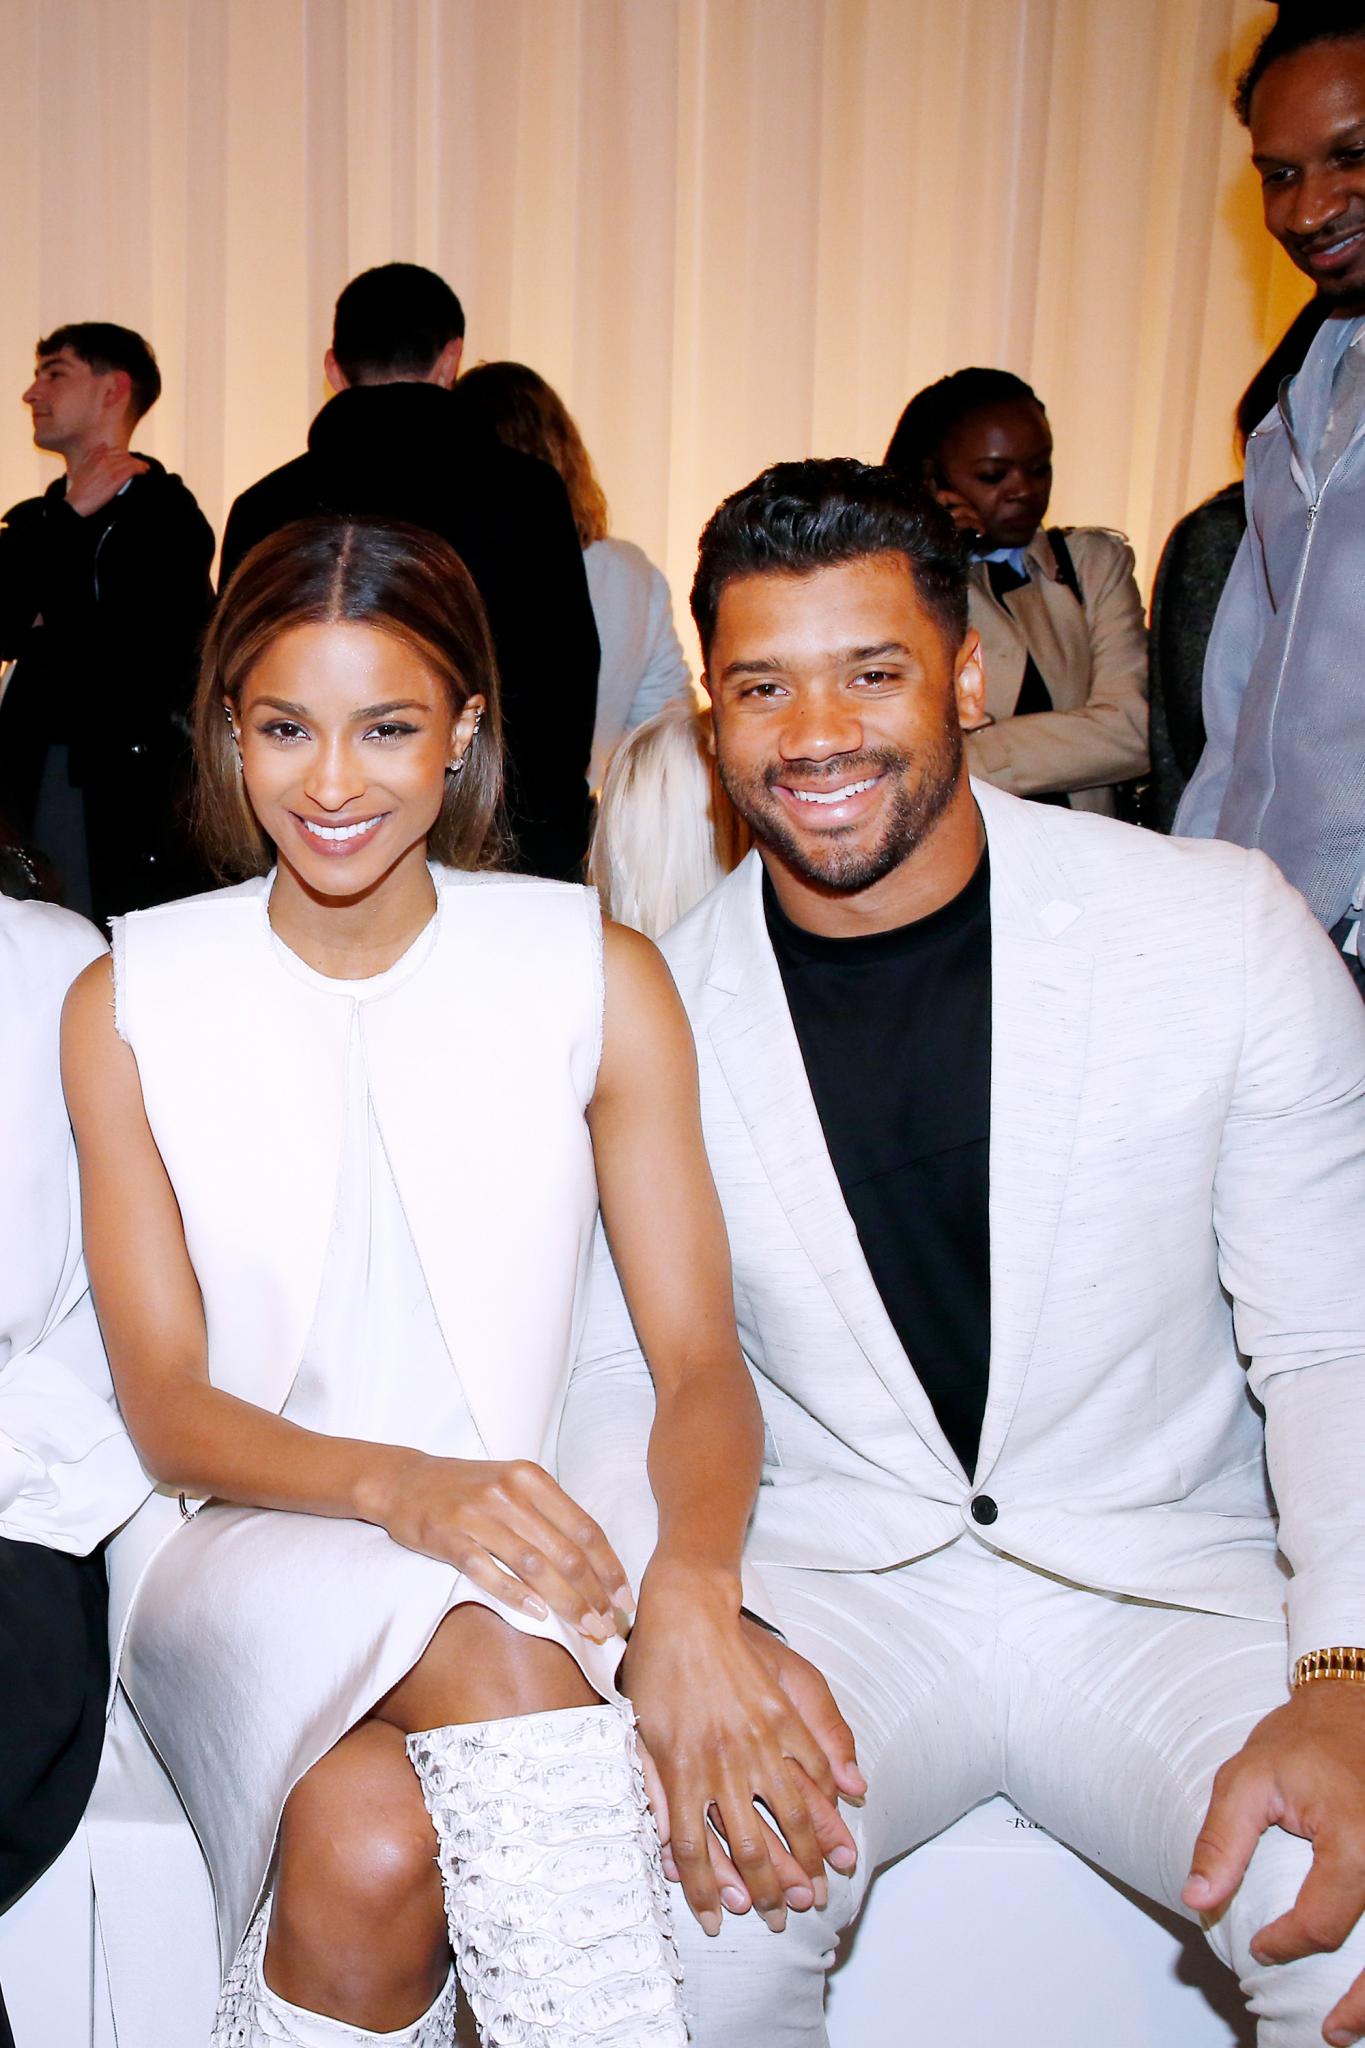 Ciara's Fans Had the Most Hilarious (and Petty) Reactions to Her Engagement